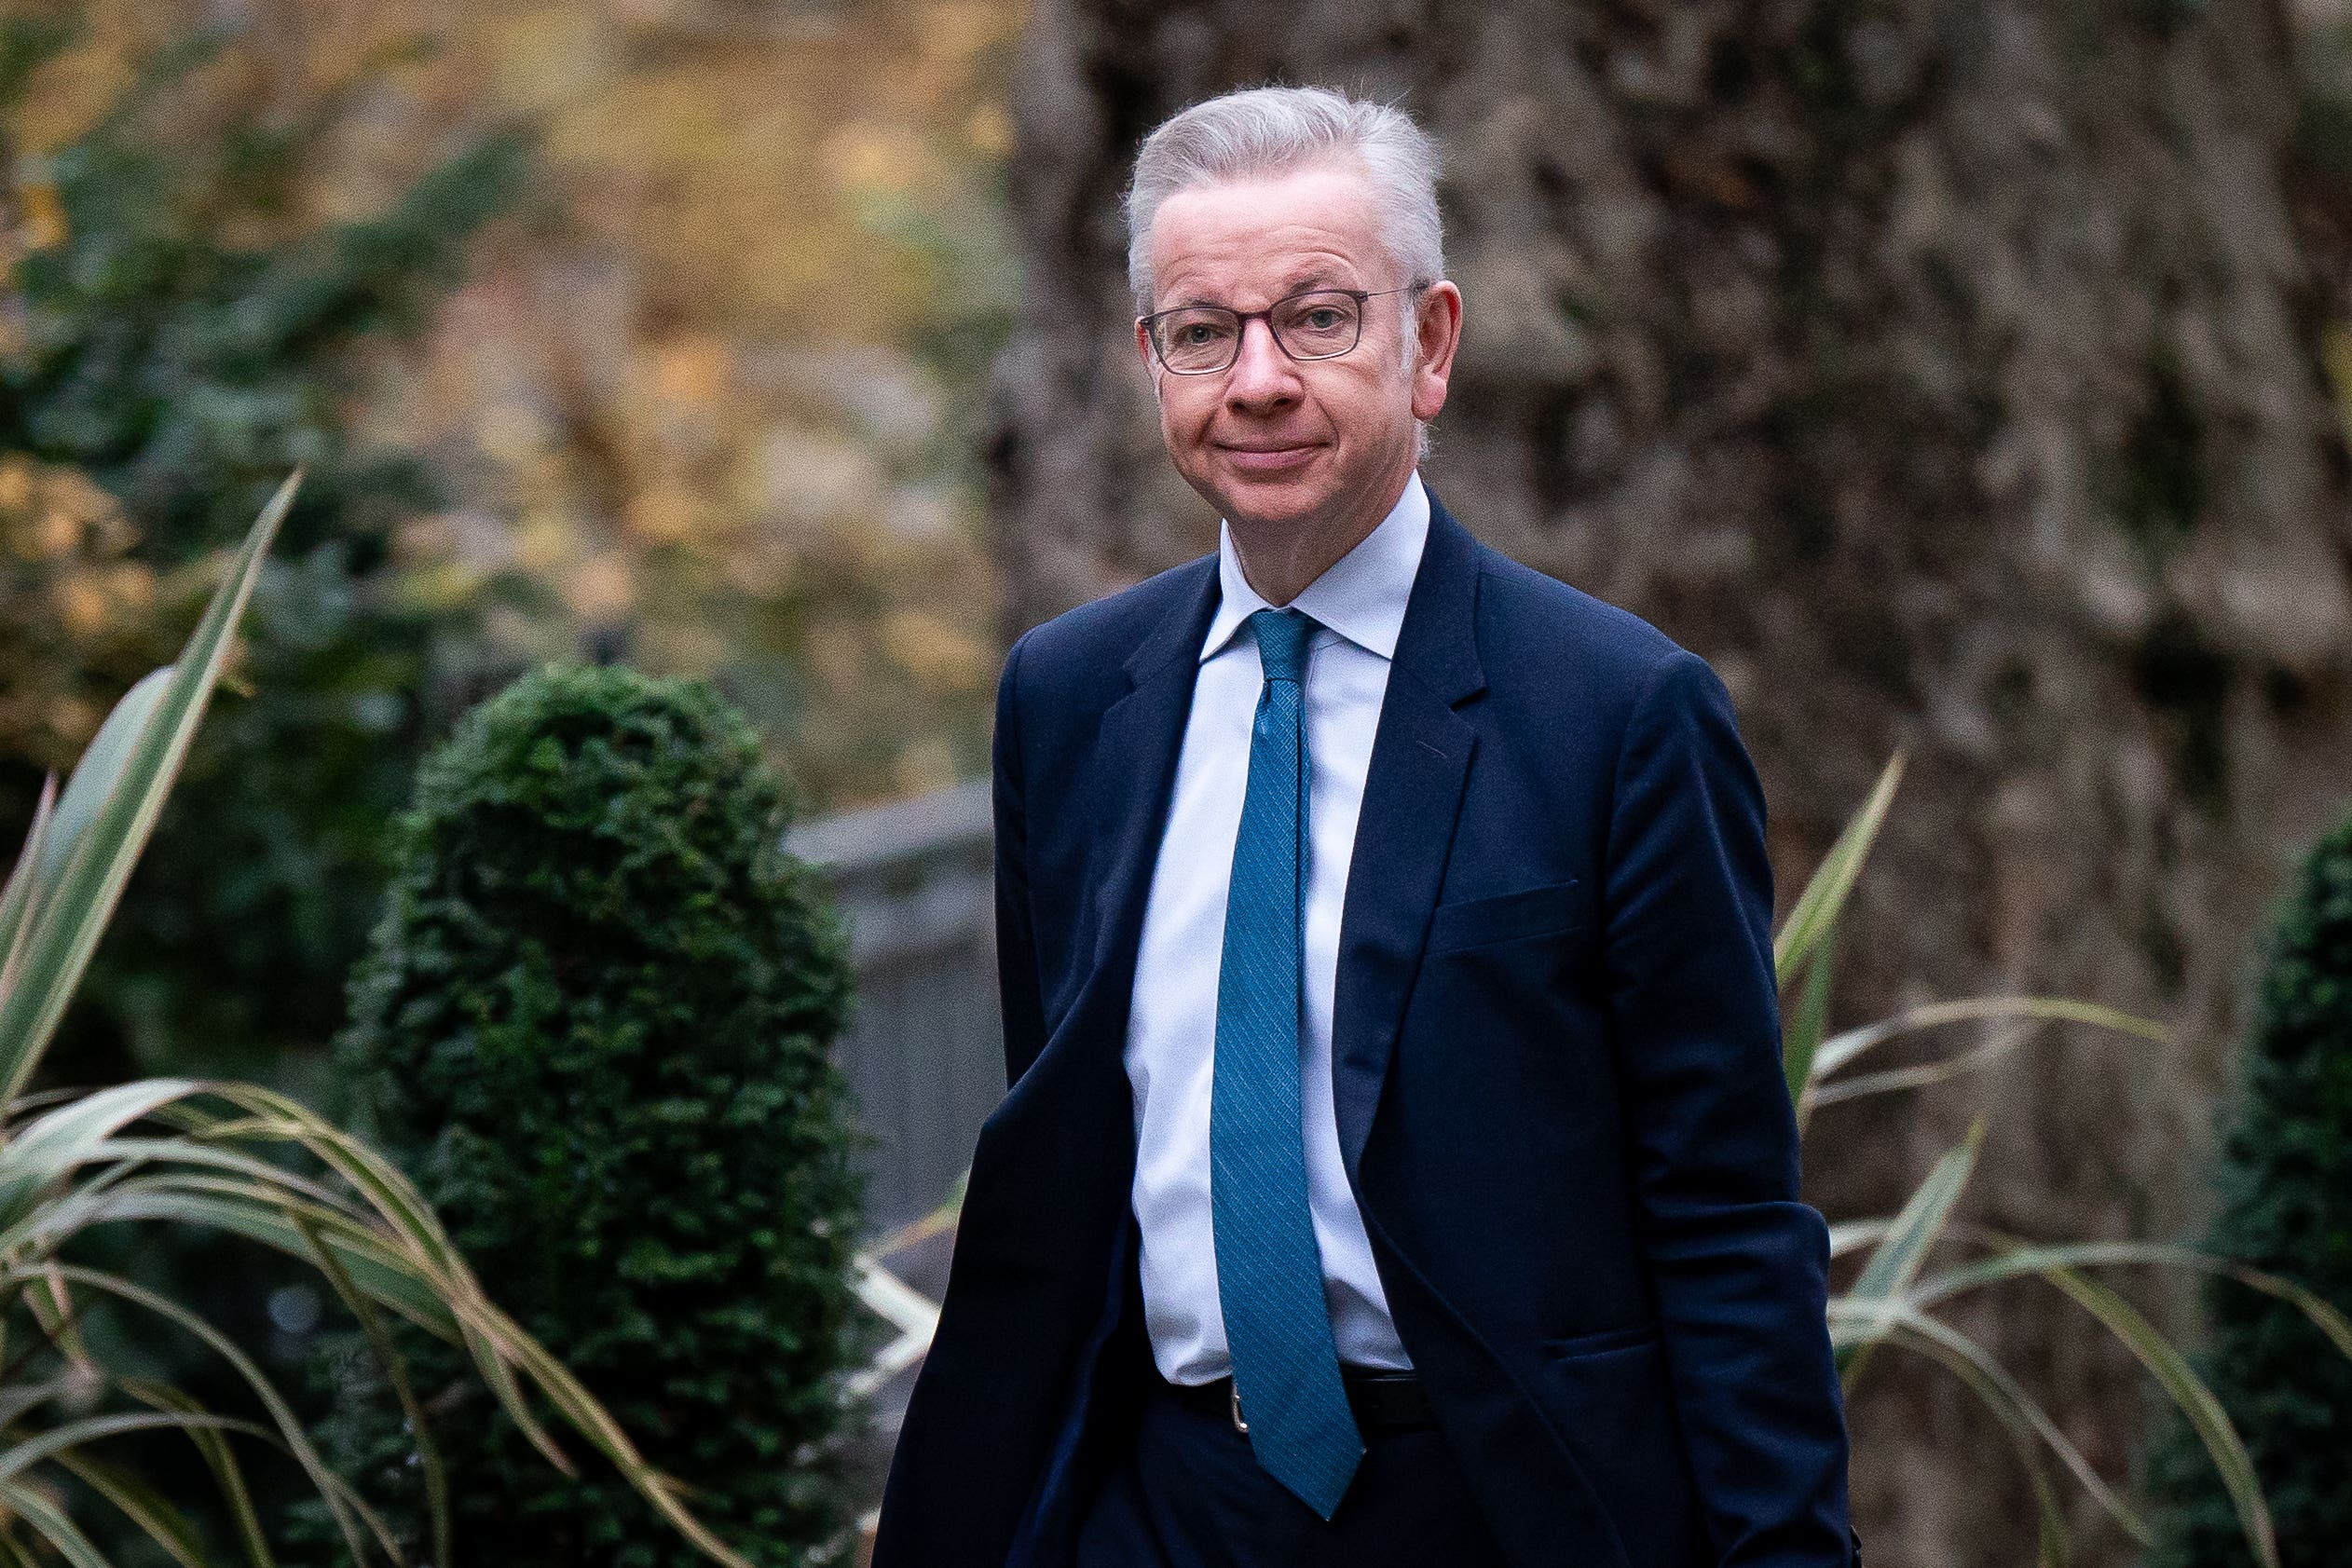 Michael Gove has been urged to answer questions in the Commons over the scandal